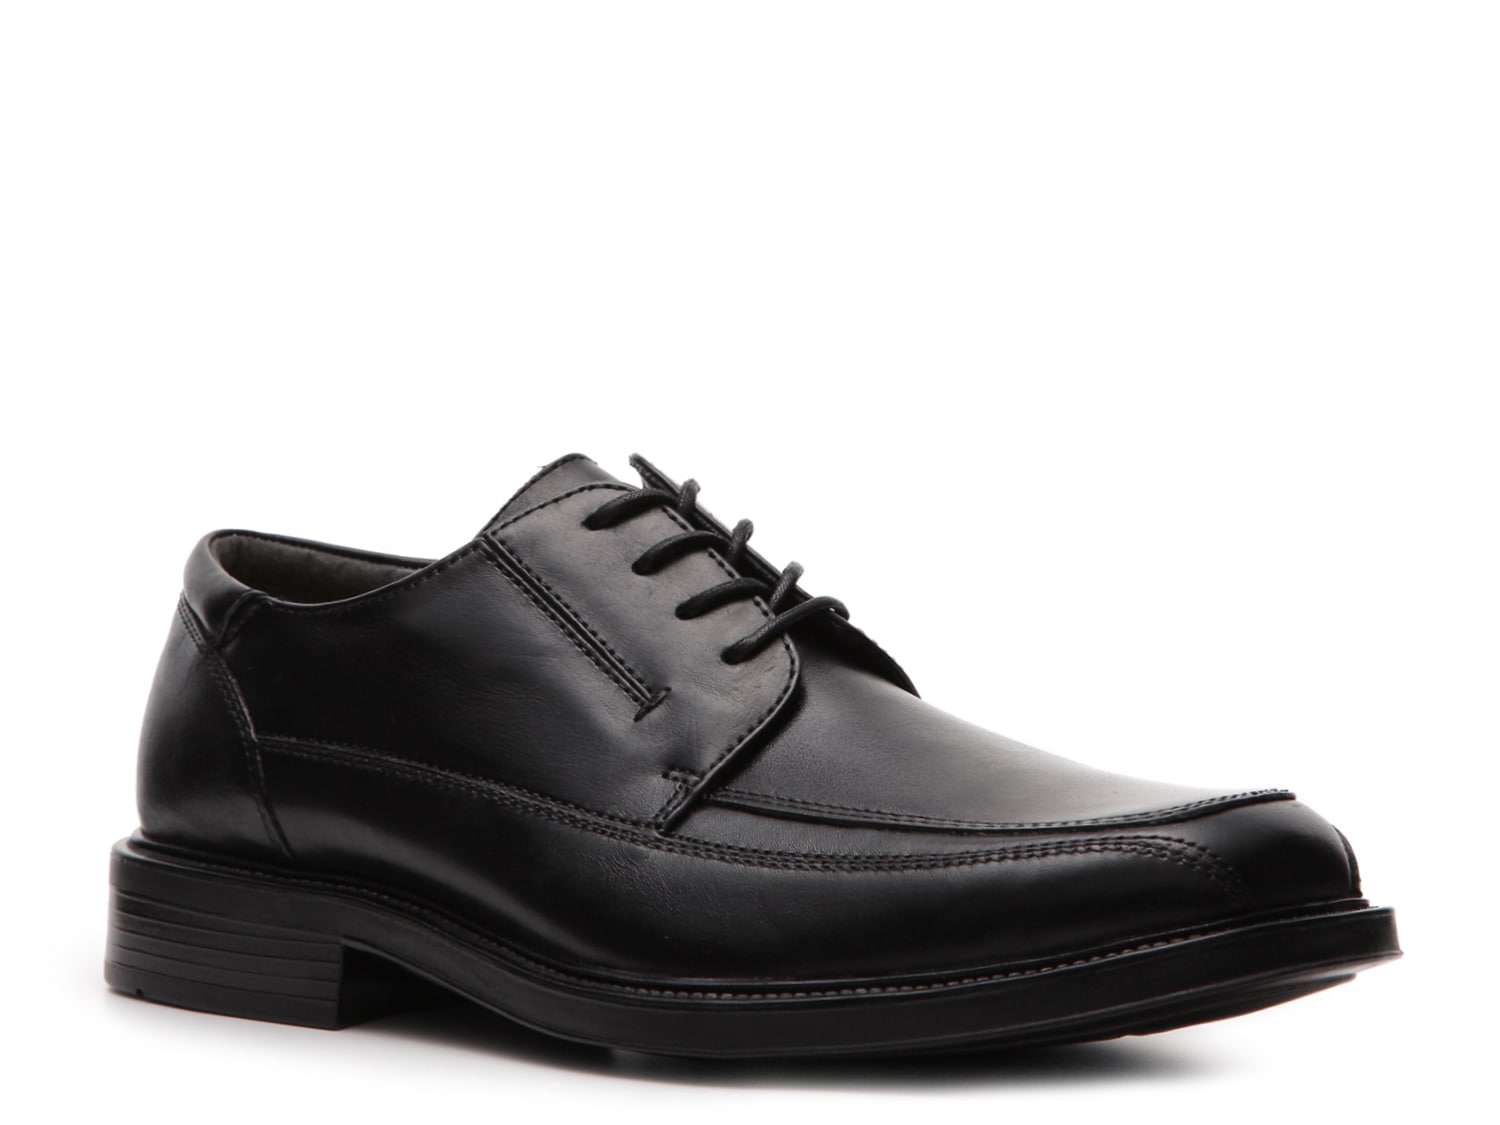 Dockers Perspective Oxford - Free Shipping | DSW